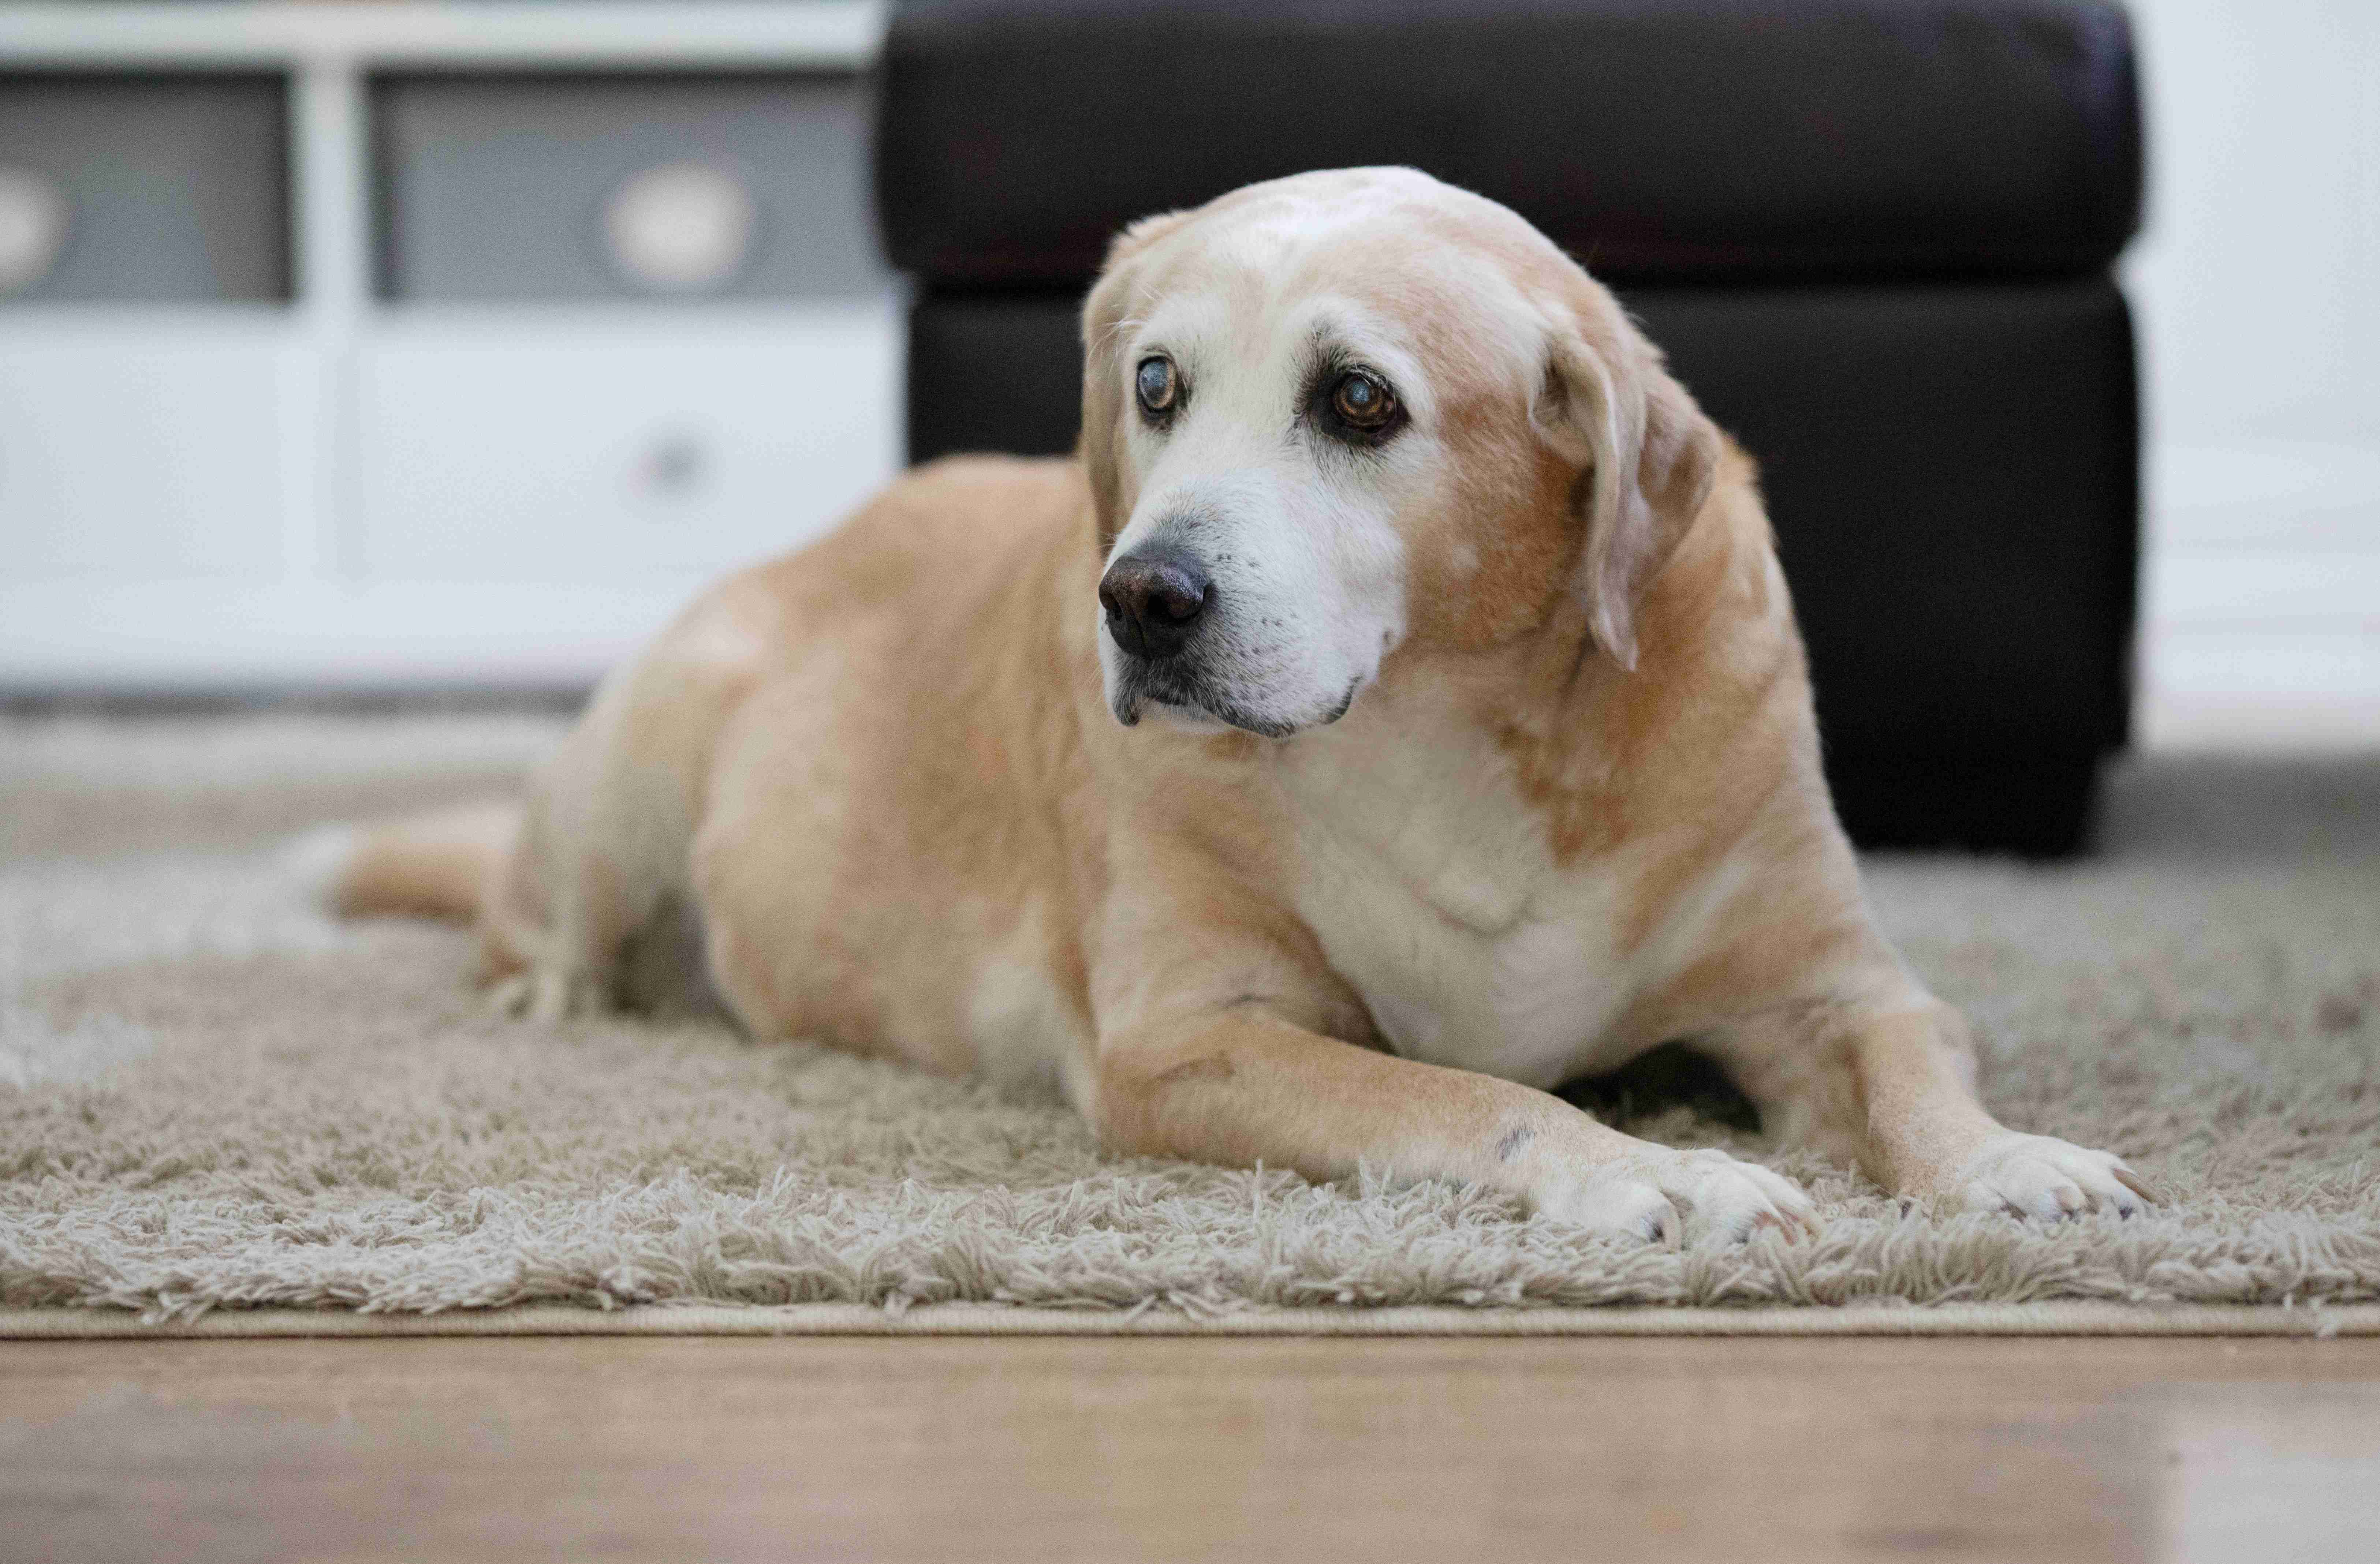 How can I prevent my golden retriever from developing hot spots?